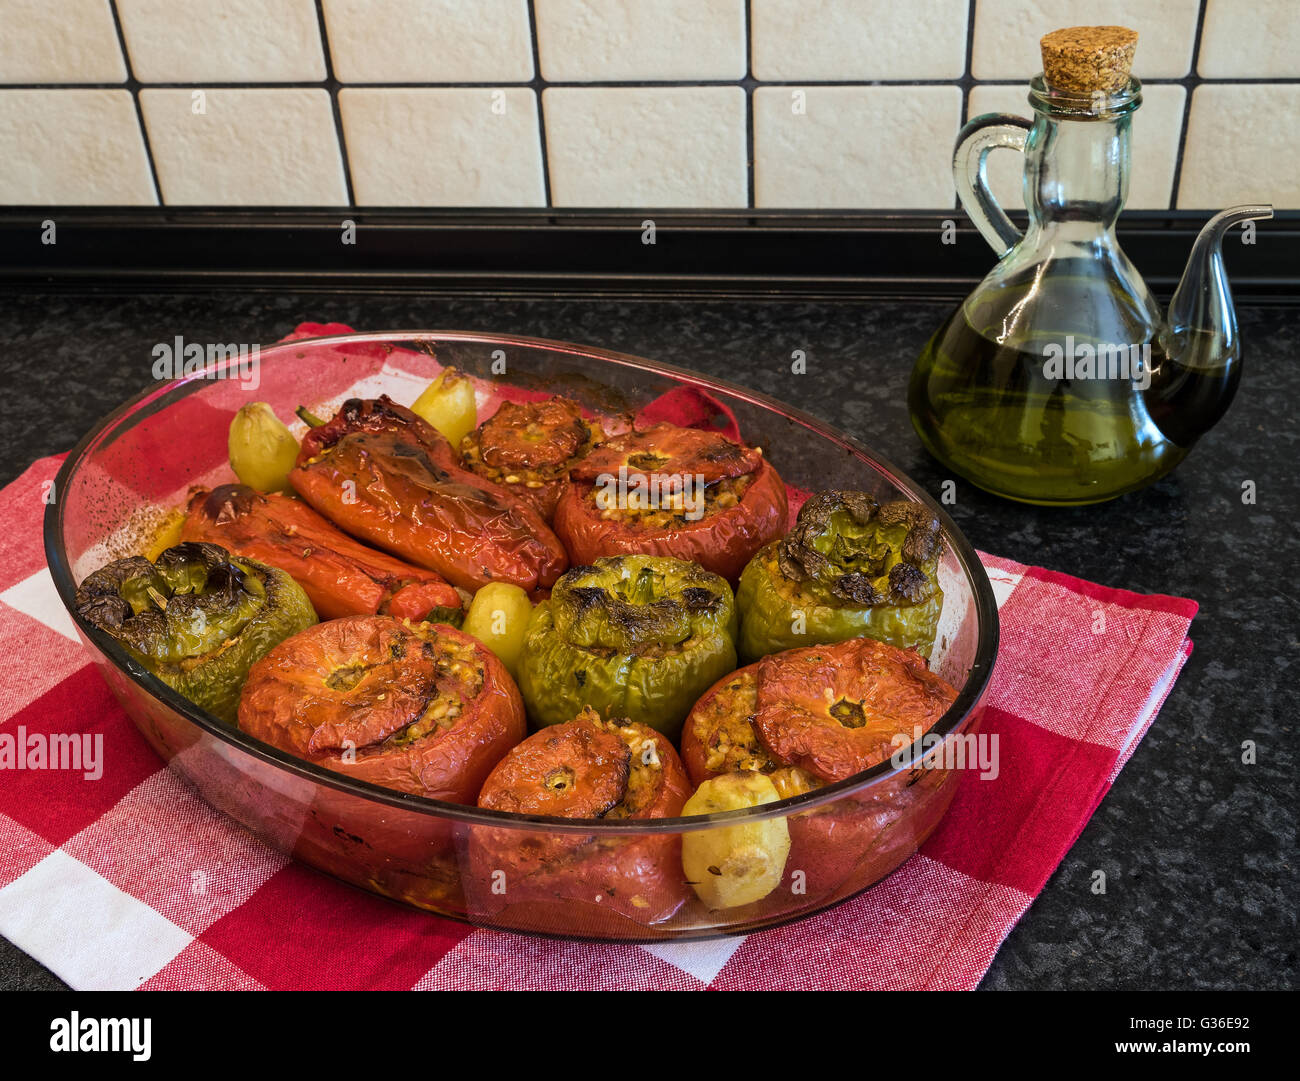 Stuffed tomatoes and peppers, a traditional plate in Greece Stock Photo